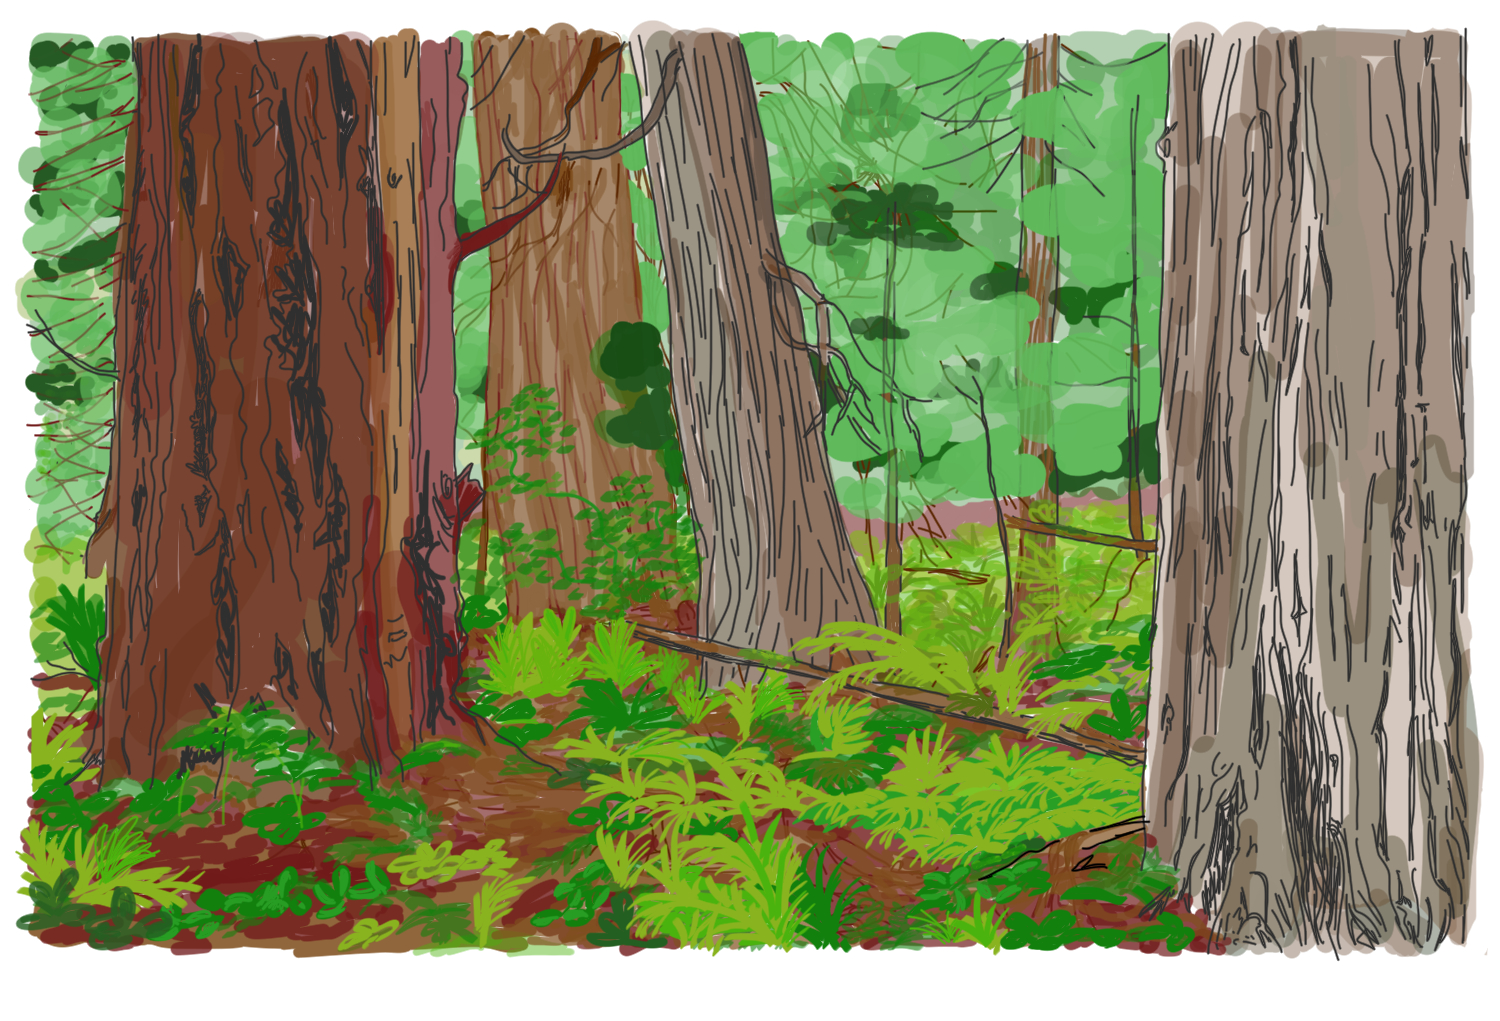 old growth